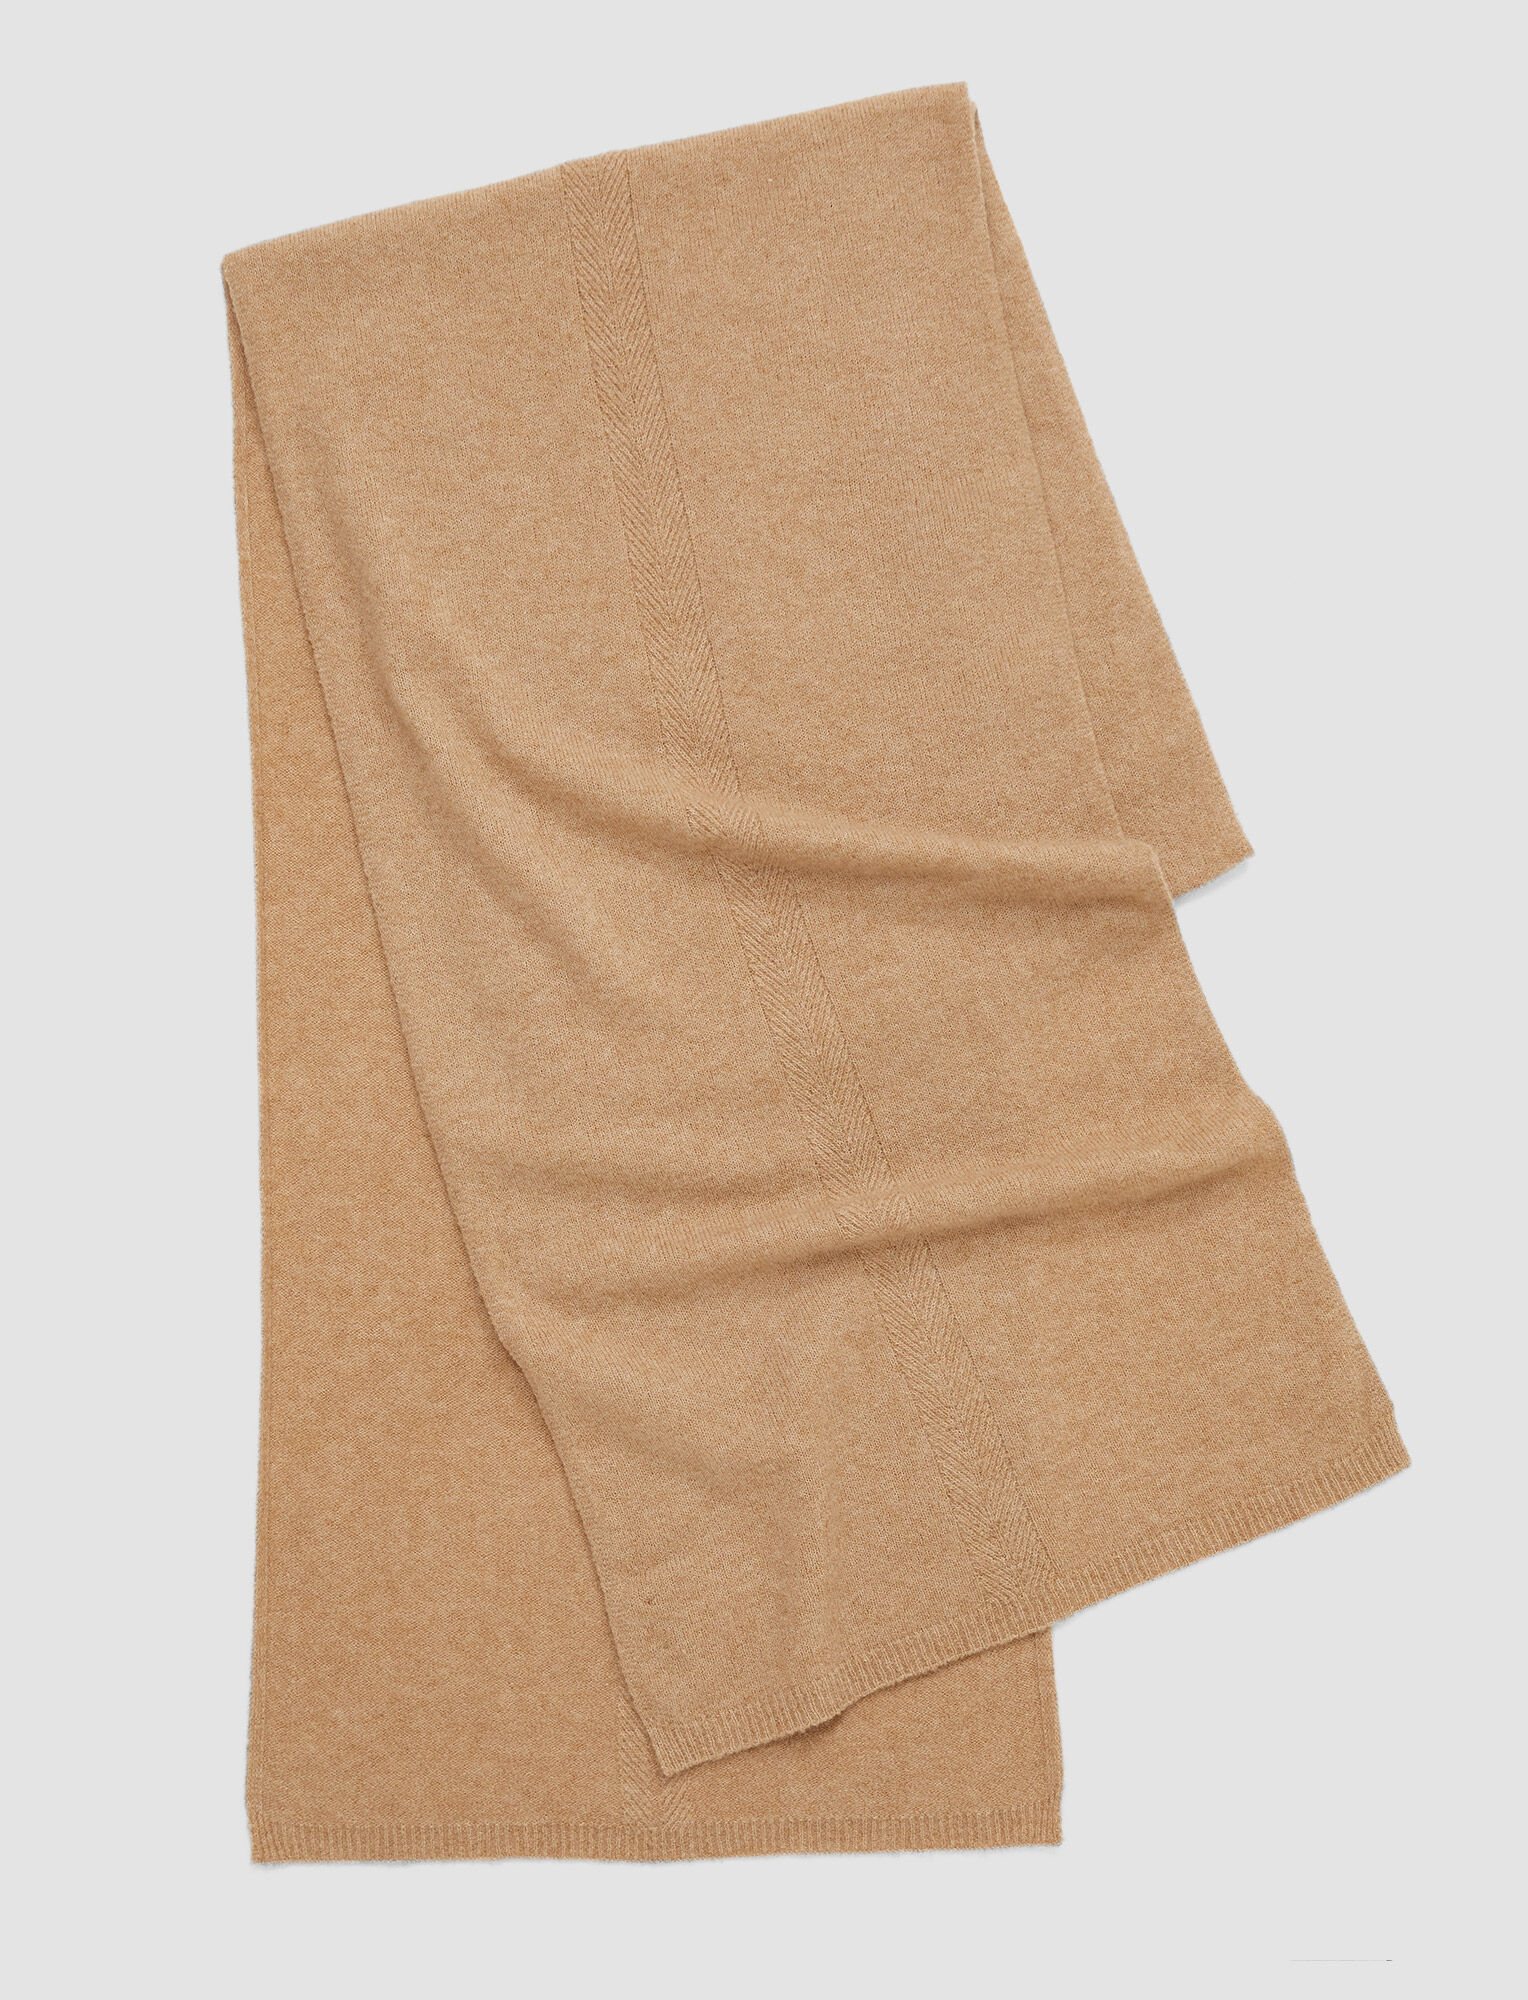 Joseph, Brushed Cashmere Scarf, in Light Camel